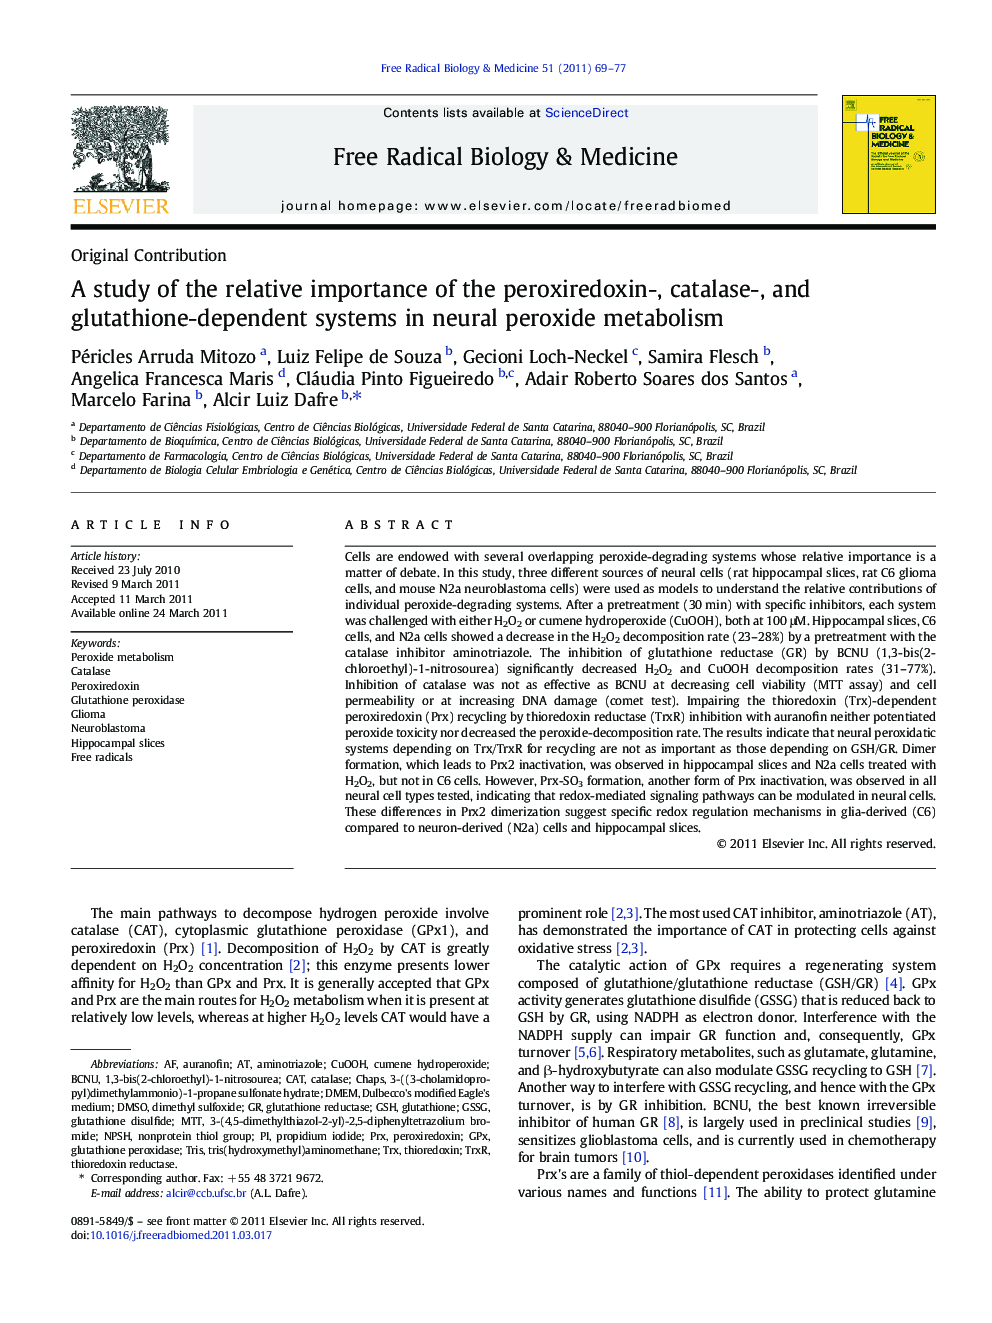 A study of the relative importance of the peroxiredoxin-, catalase-, and glutathione-dependent systems in neural peroxide metabolism